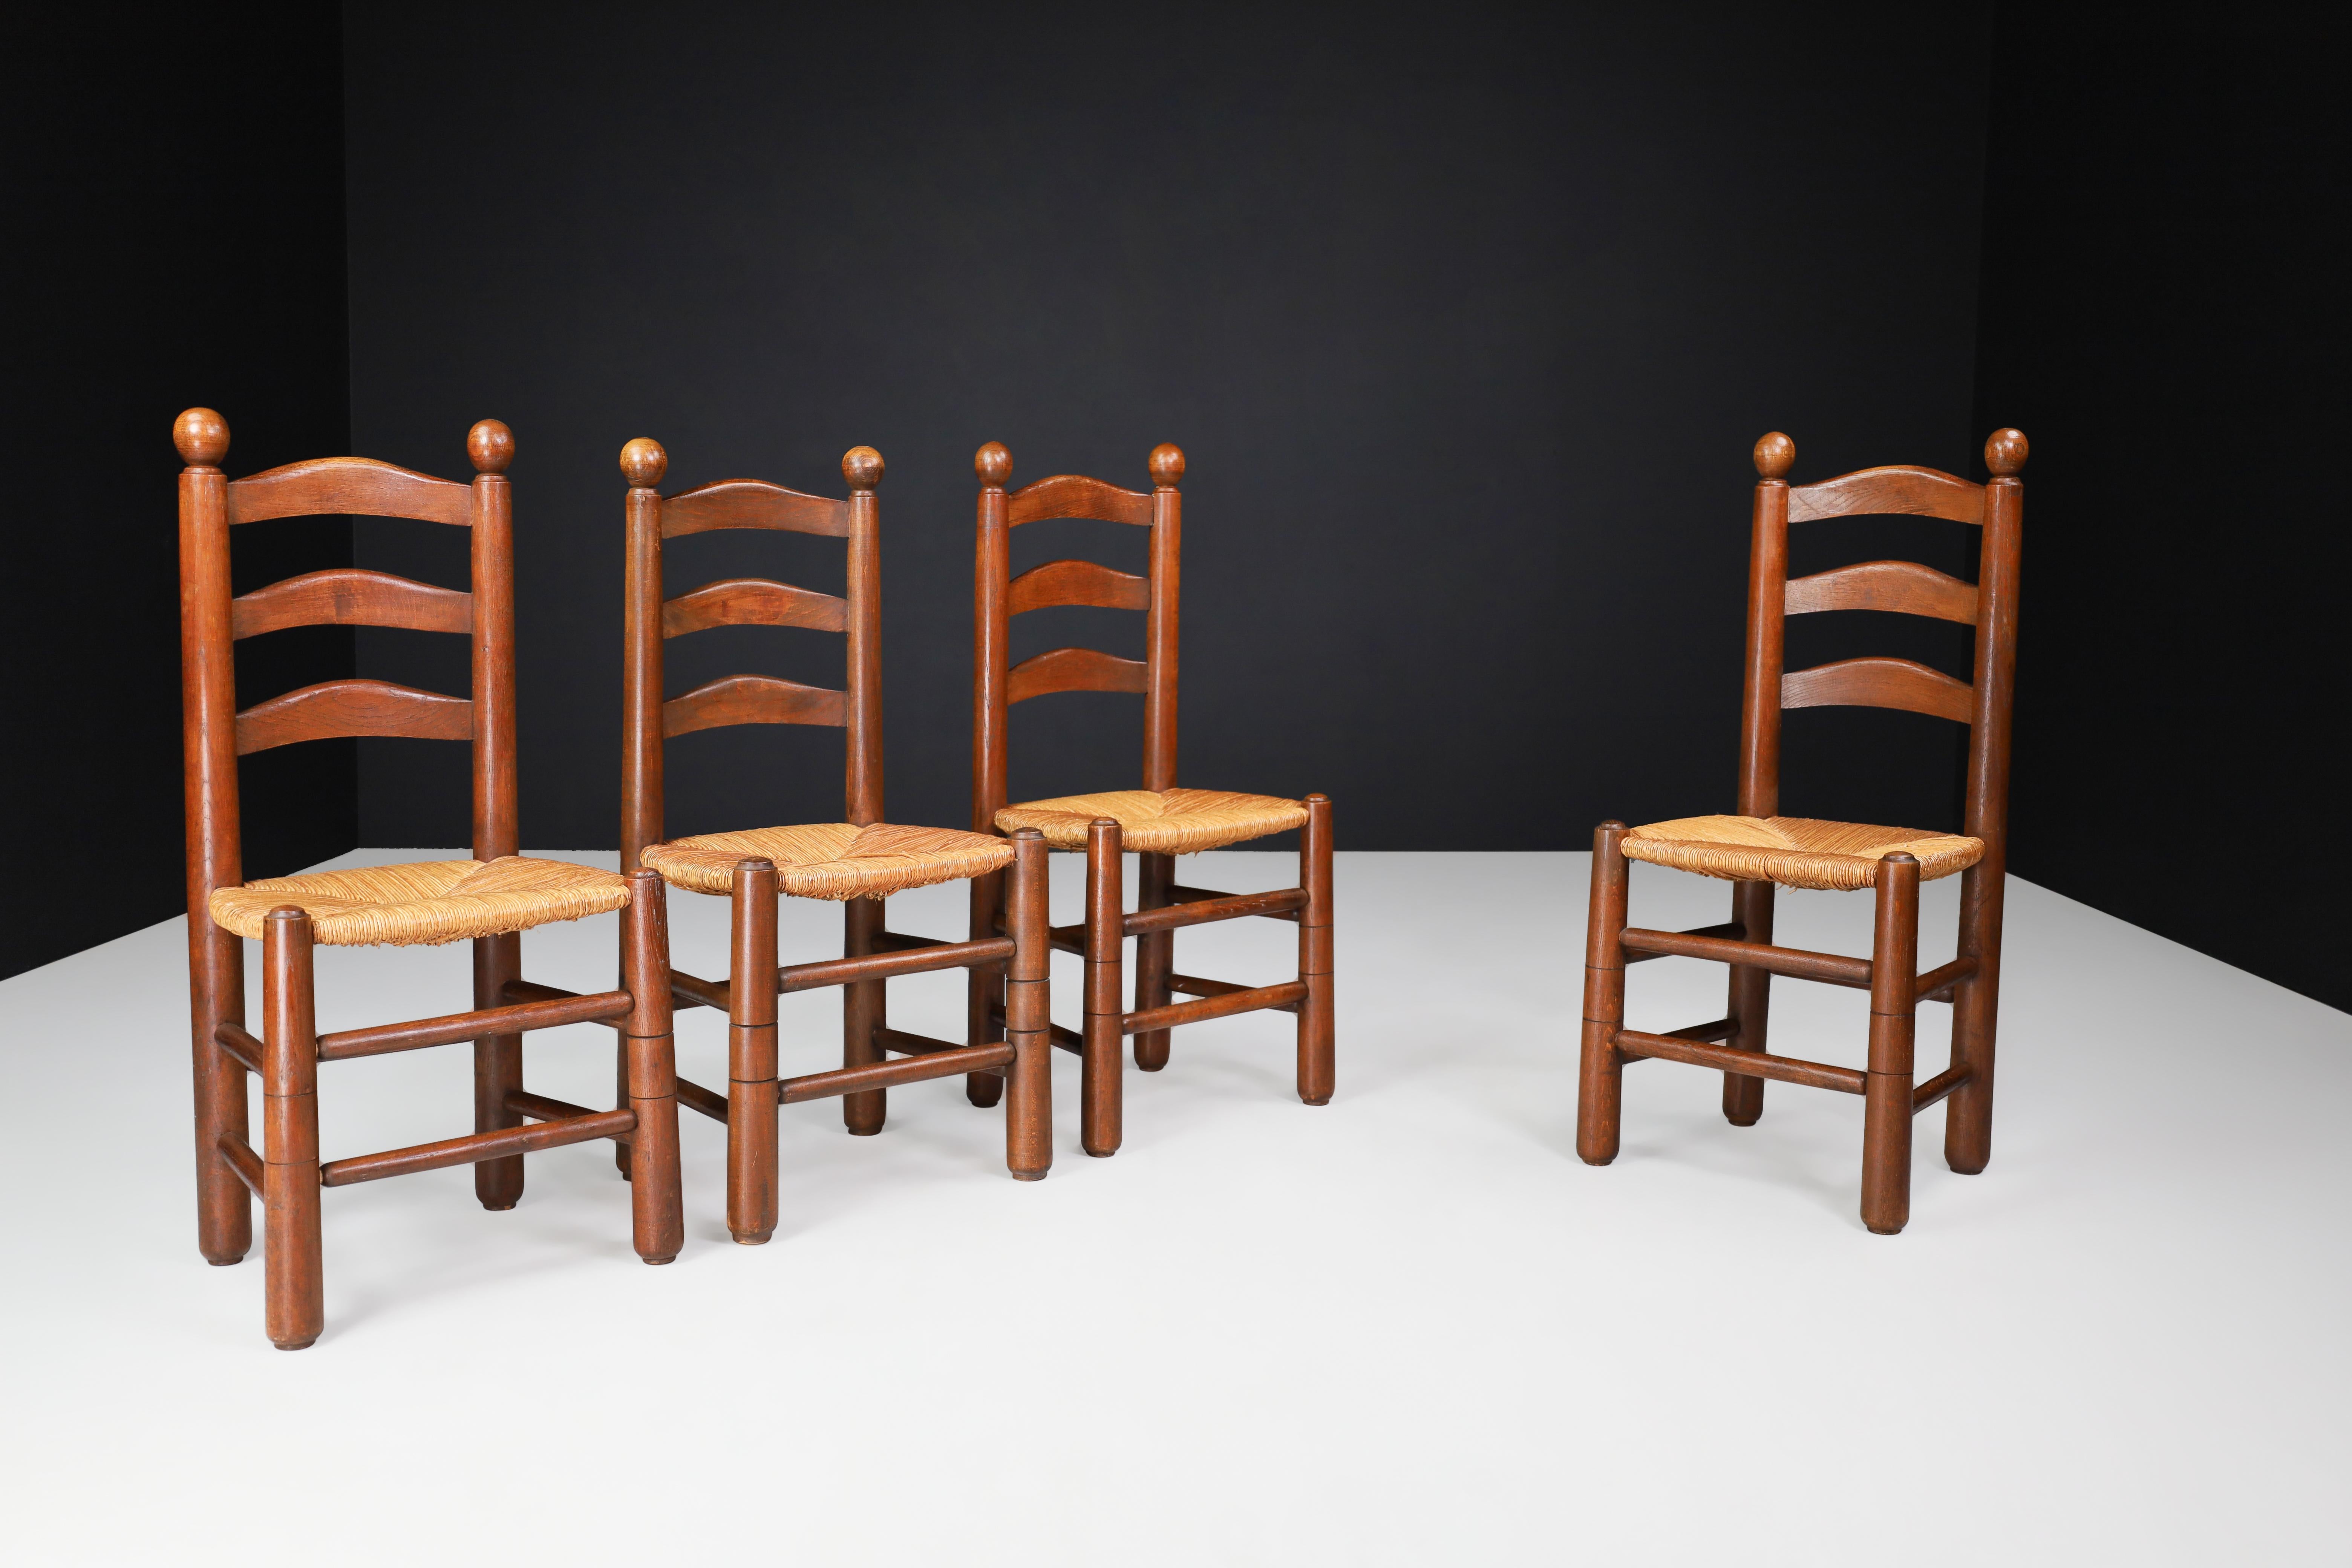 Georges Robert dining chairs in oak and rush, France 1950s.

Enhance the charm of your mountain or chalet setting with these exquisite chalet chairs crafted in the 1950s by French cabinetmaker Meubles Georges Robert. These chairs are a beautiful